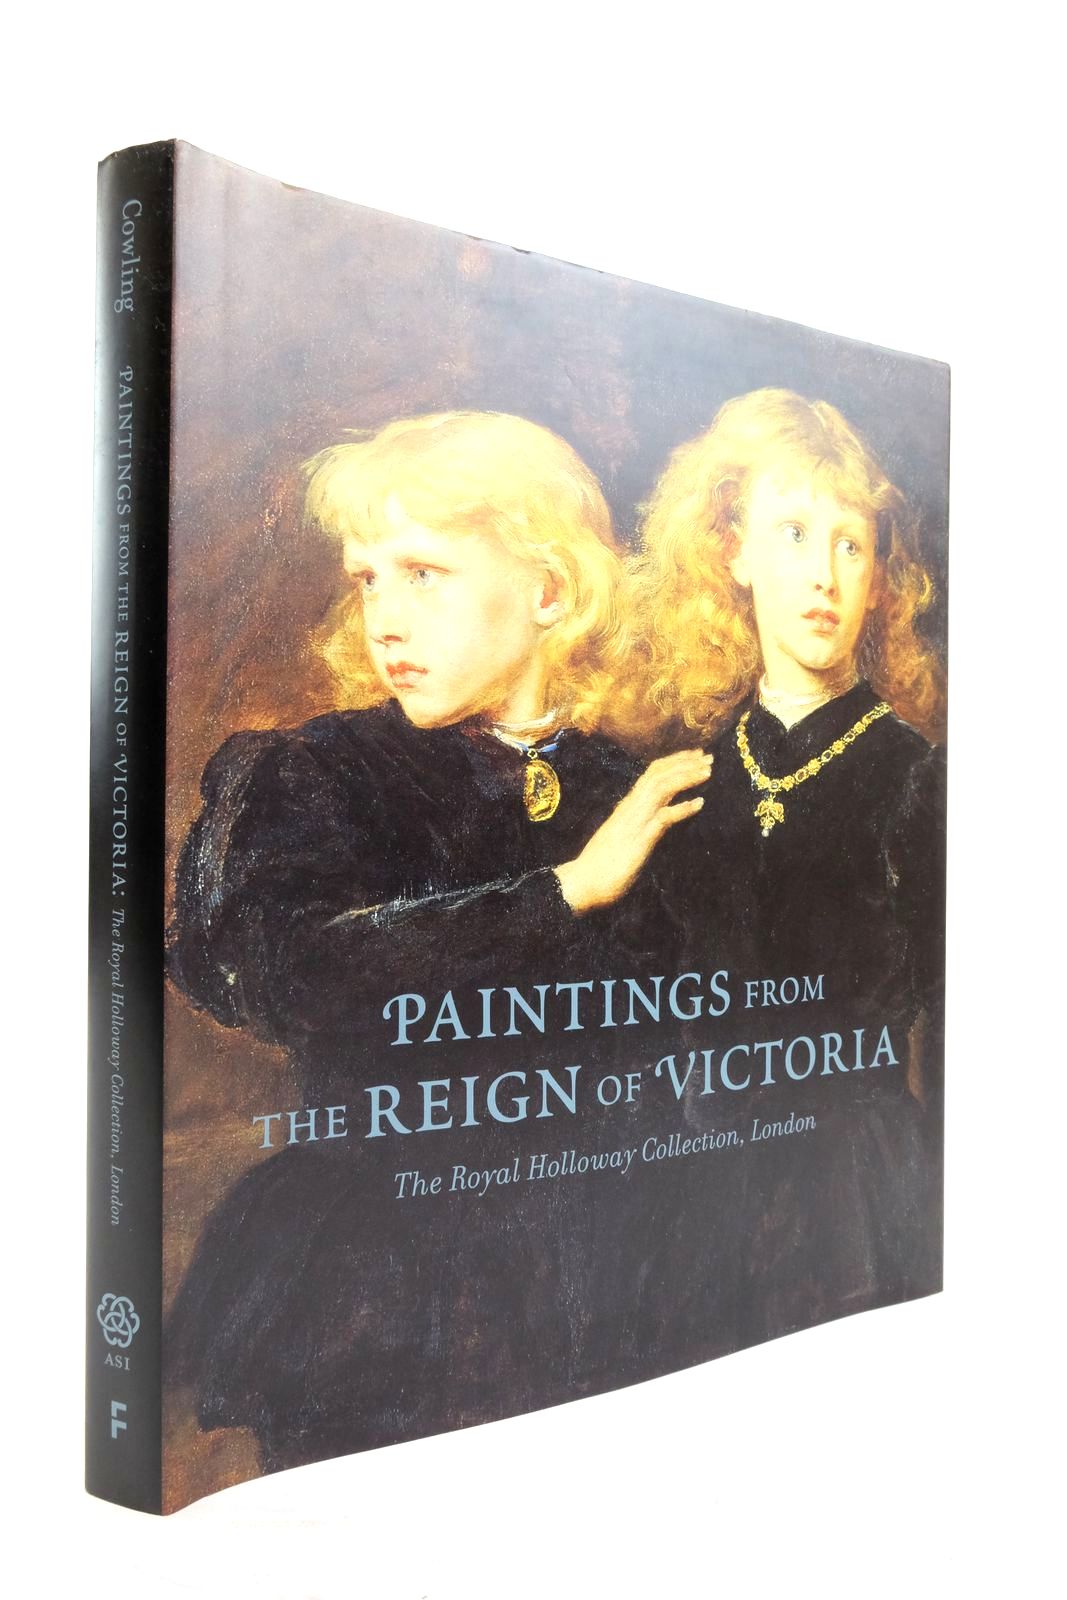 Photo of PAINTINGS FROM THE REIGN OF VICTORIA- Stock Number: 2137707